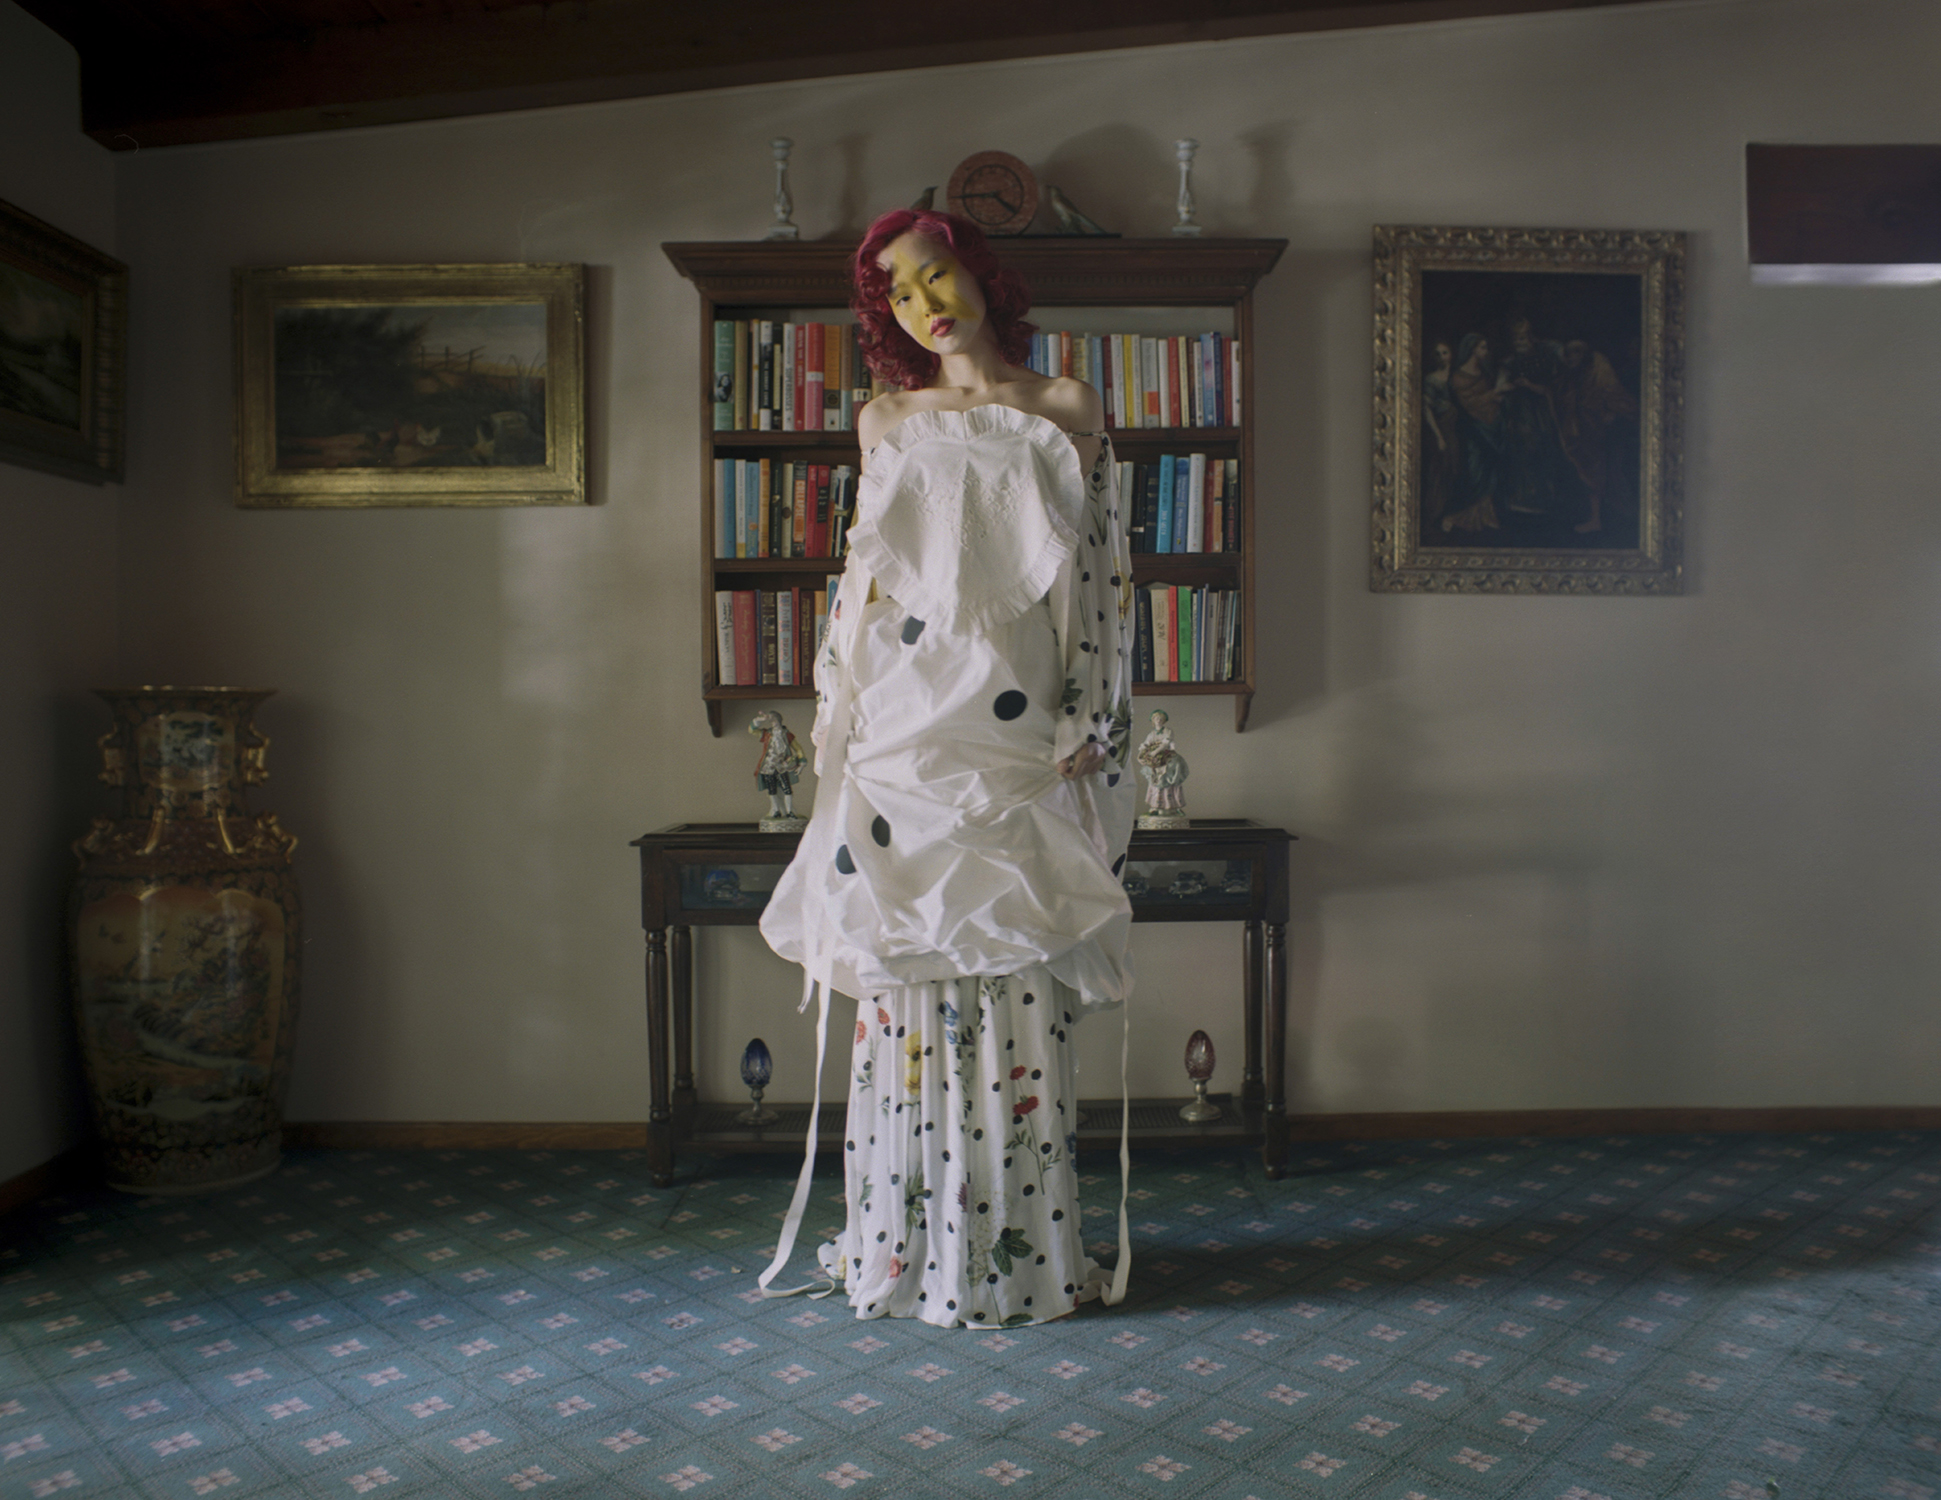 A model with yellow star makeup in a white dress standing in a study